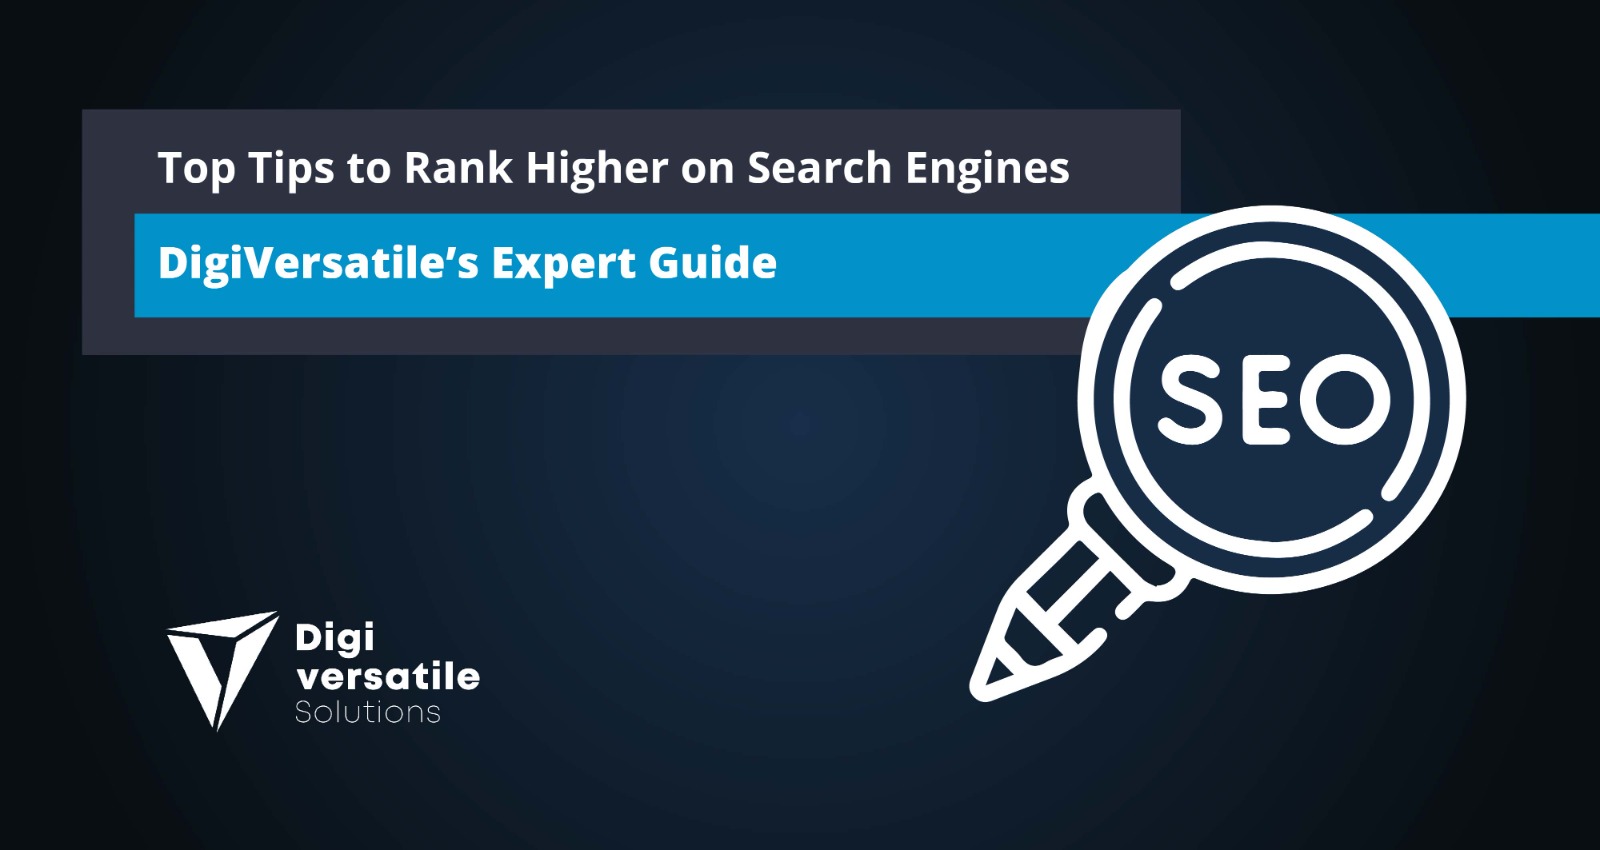 Top Tips to Rank Higher on Search Engines – DigiVersatile’s Expert Guide